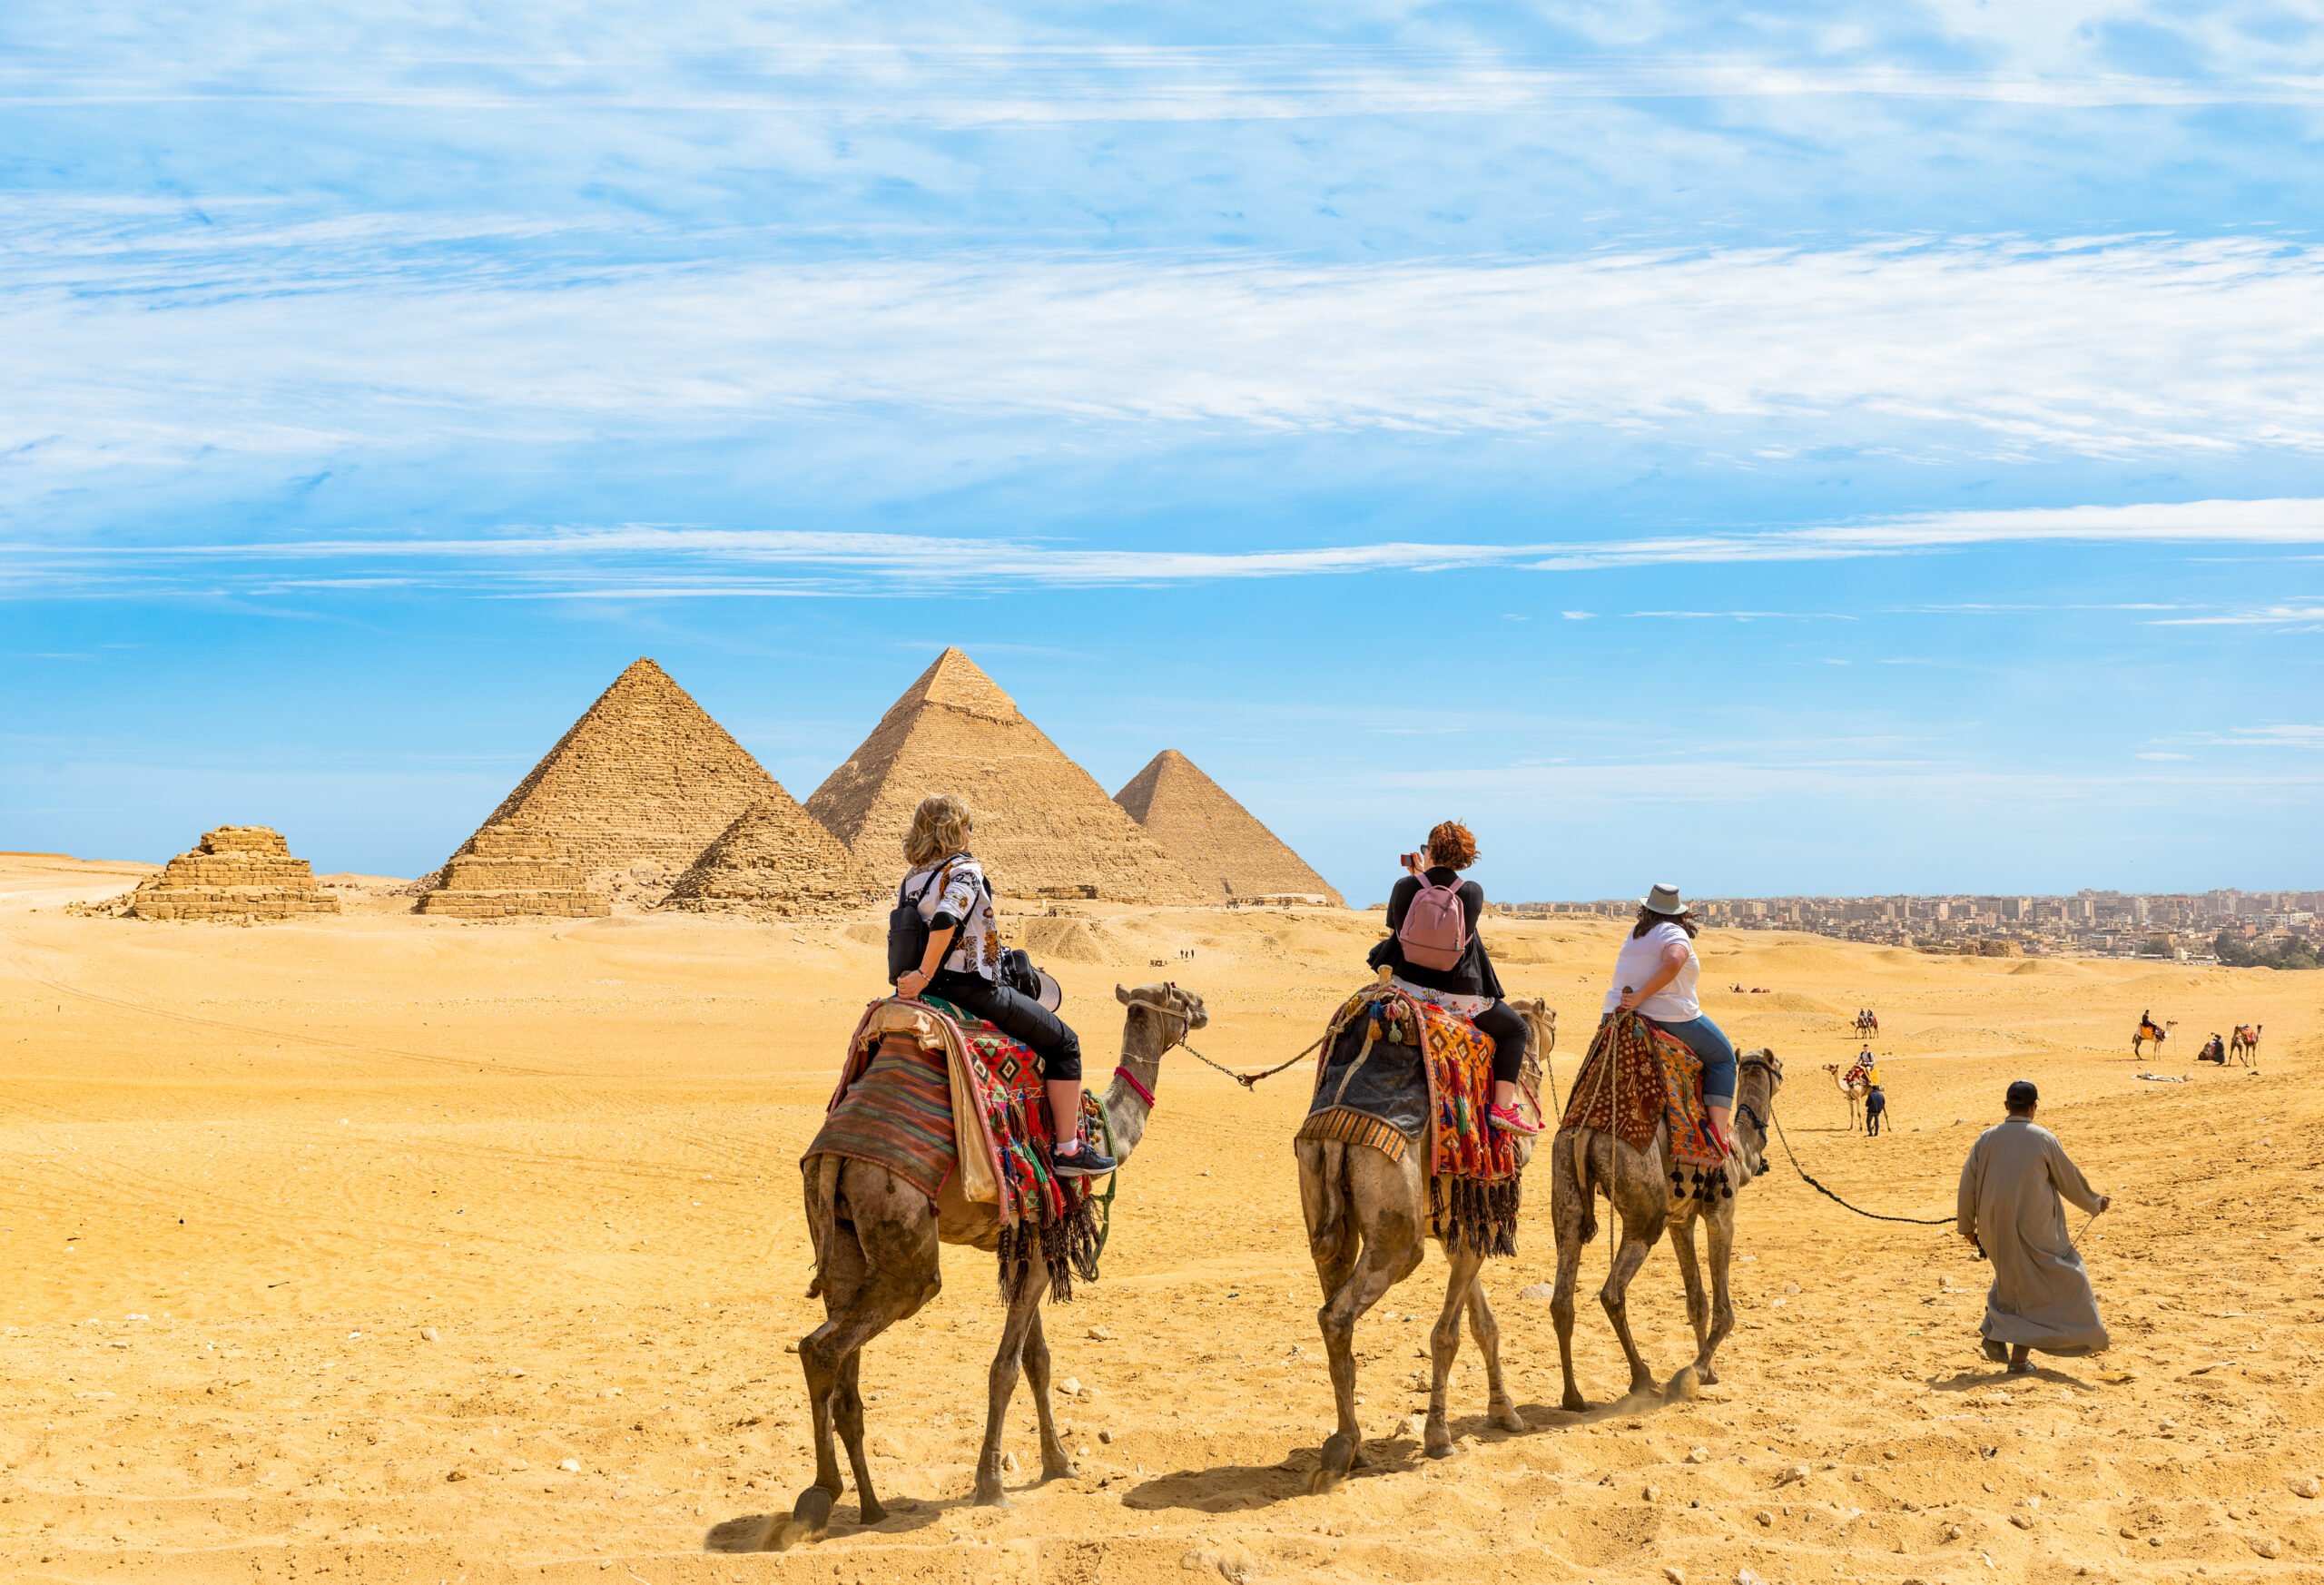 Camel riding near the Great Pyramids in Giza, Egypt